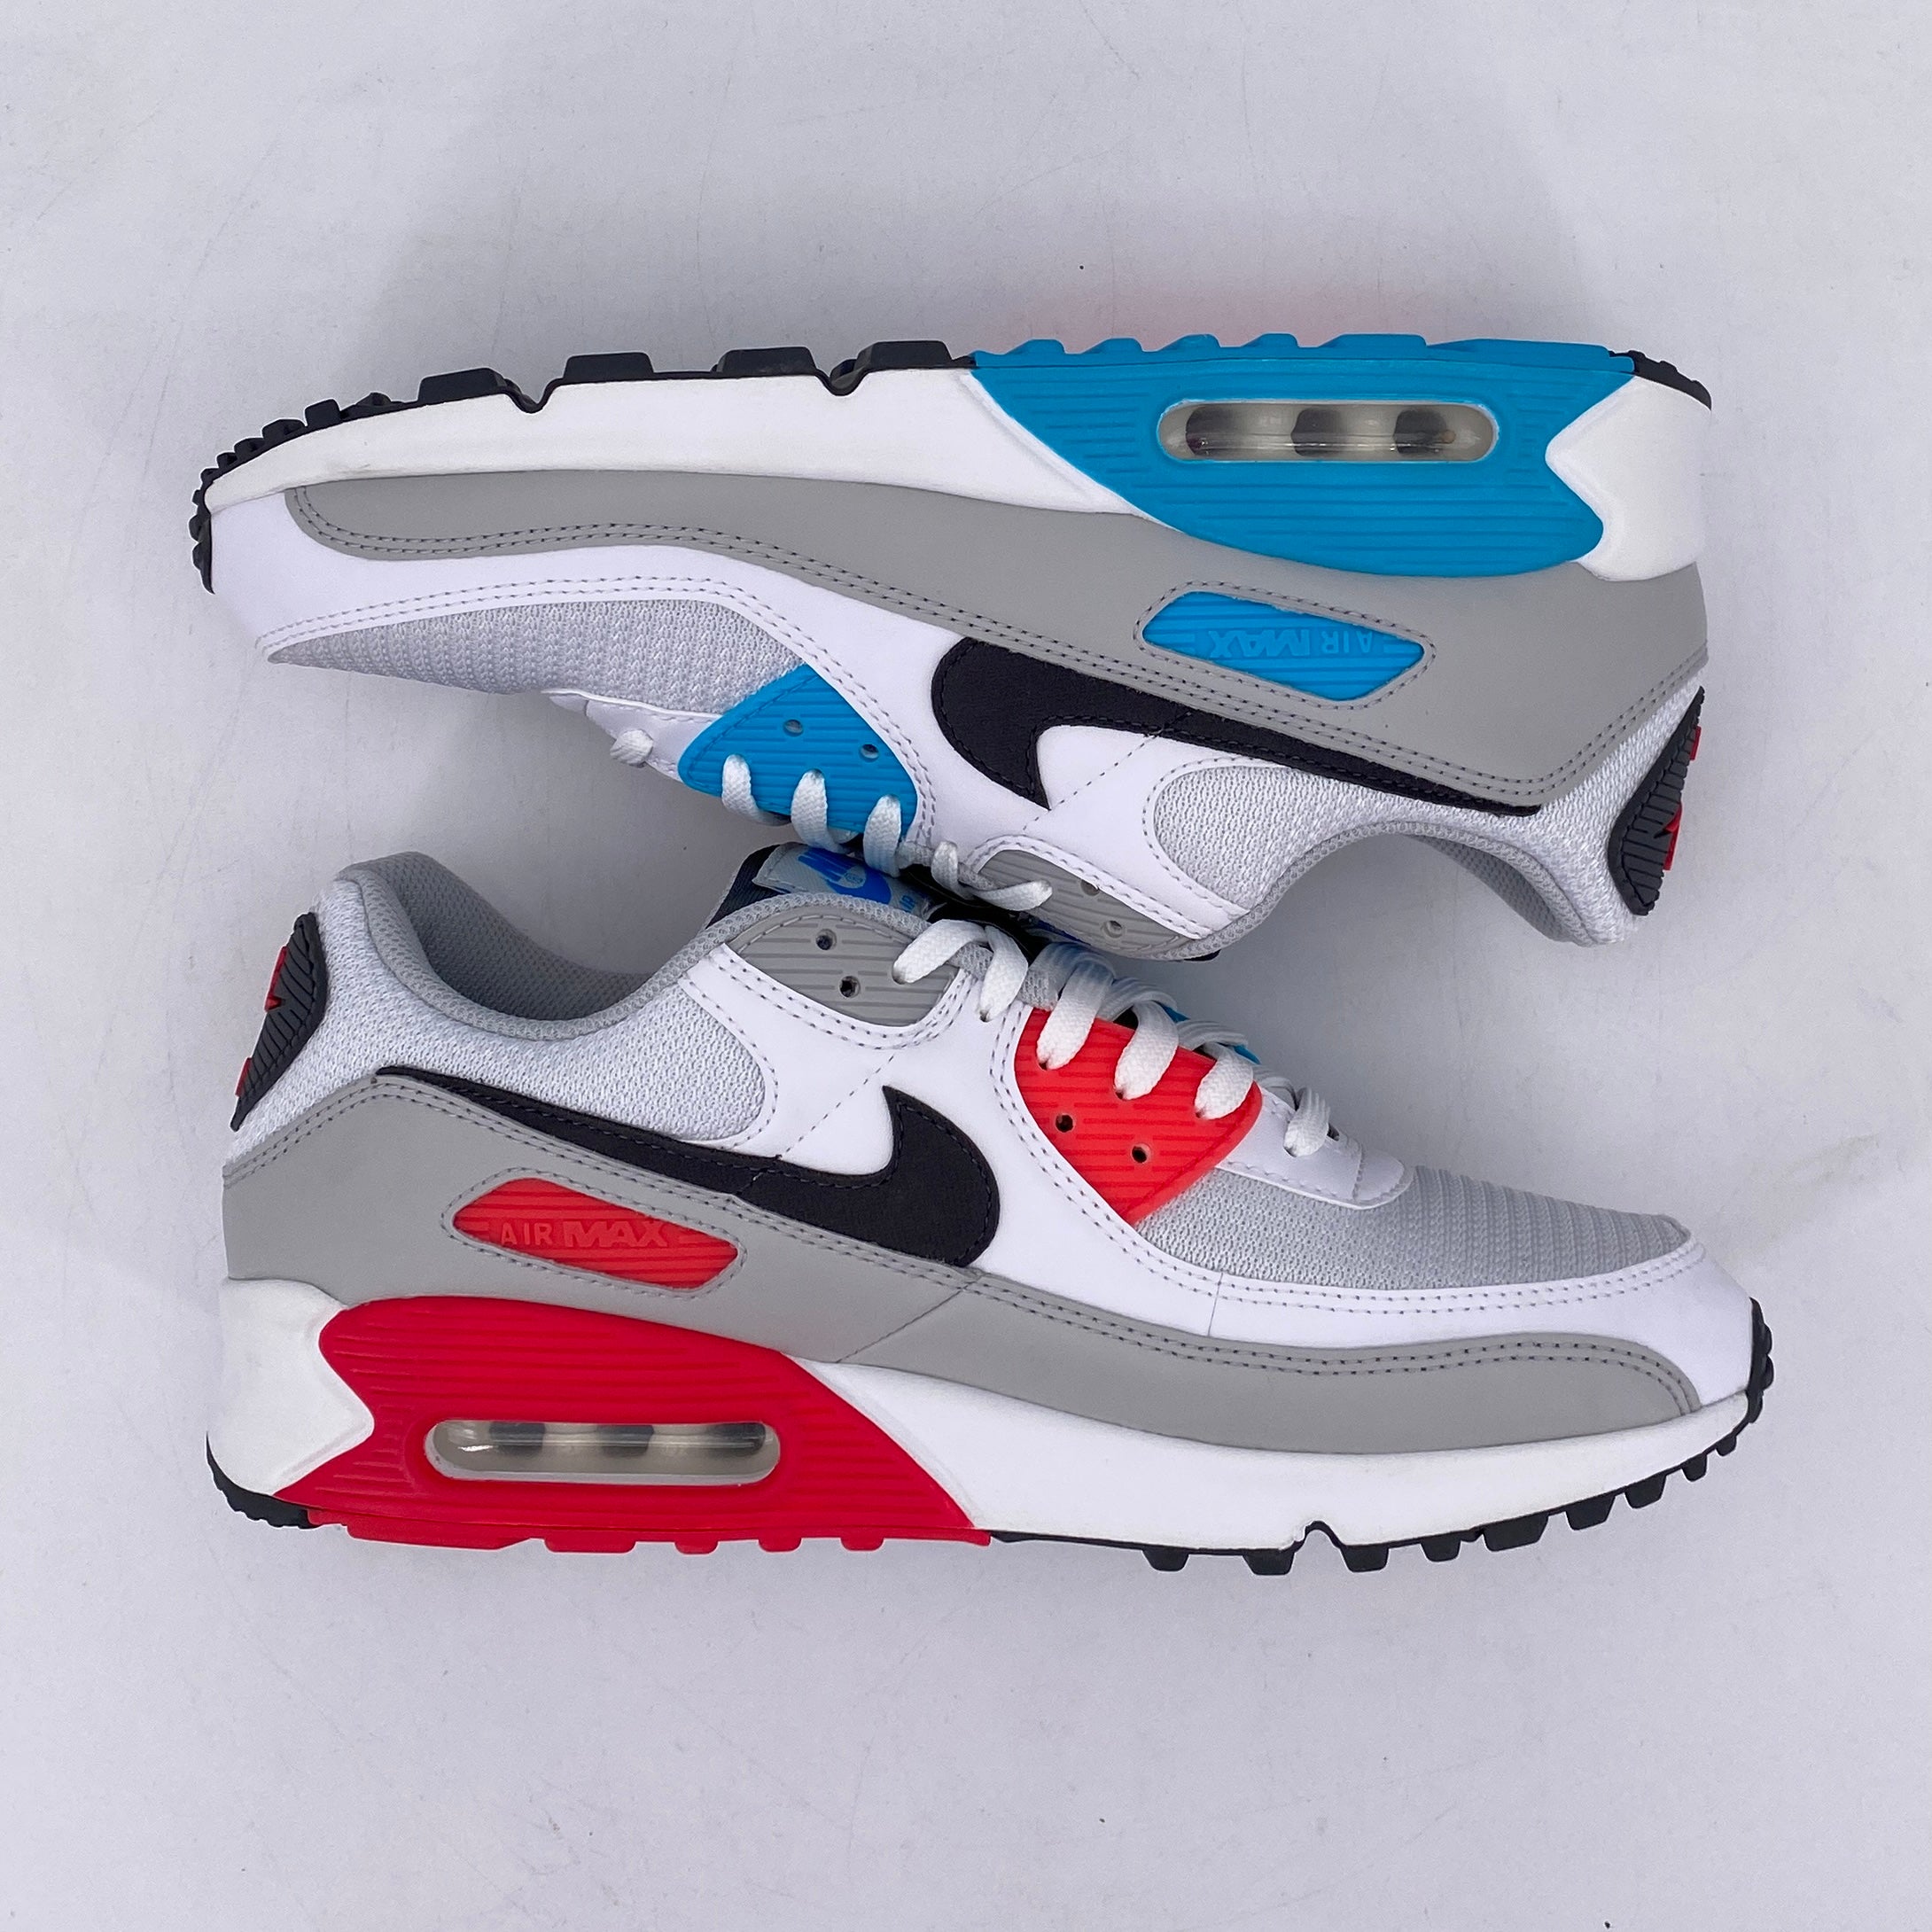 Nike Air Max 90 &quot;Chlorine Blue&quot; 2021 New Size 10.5